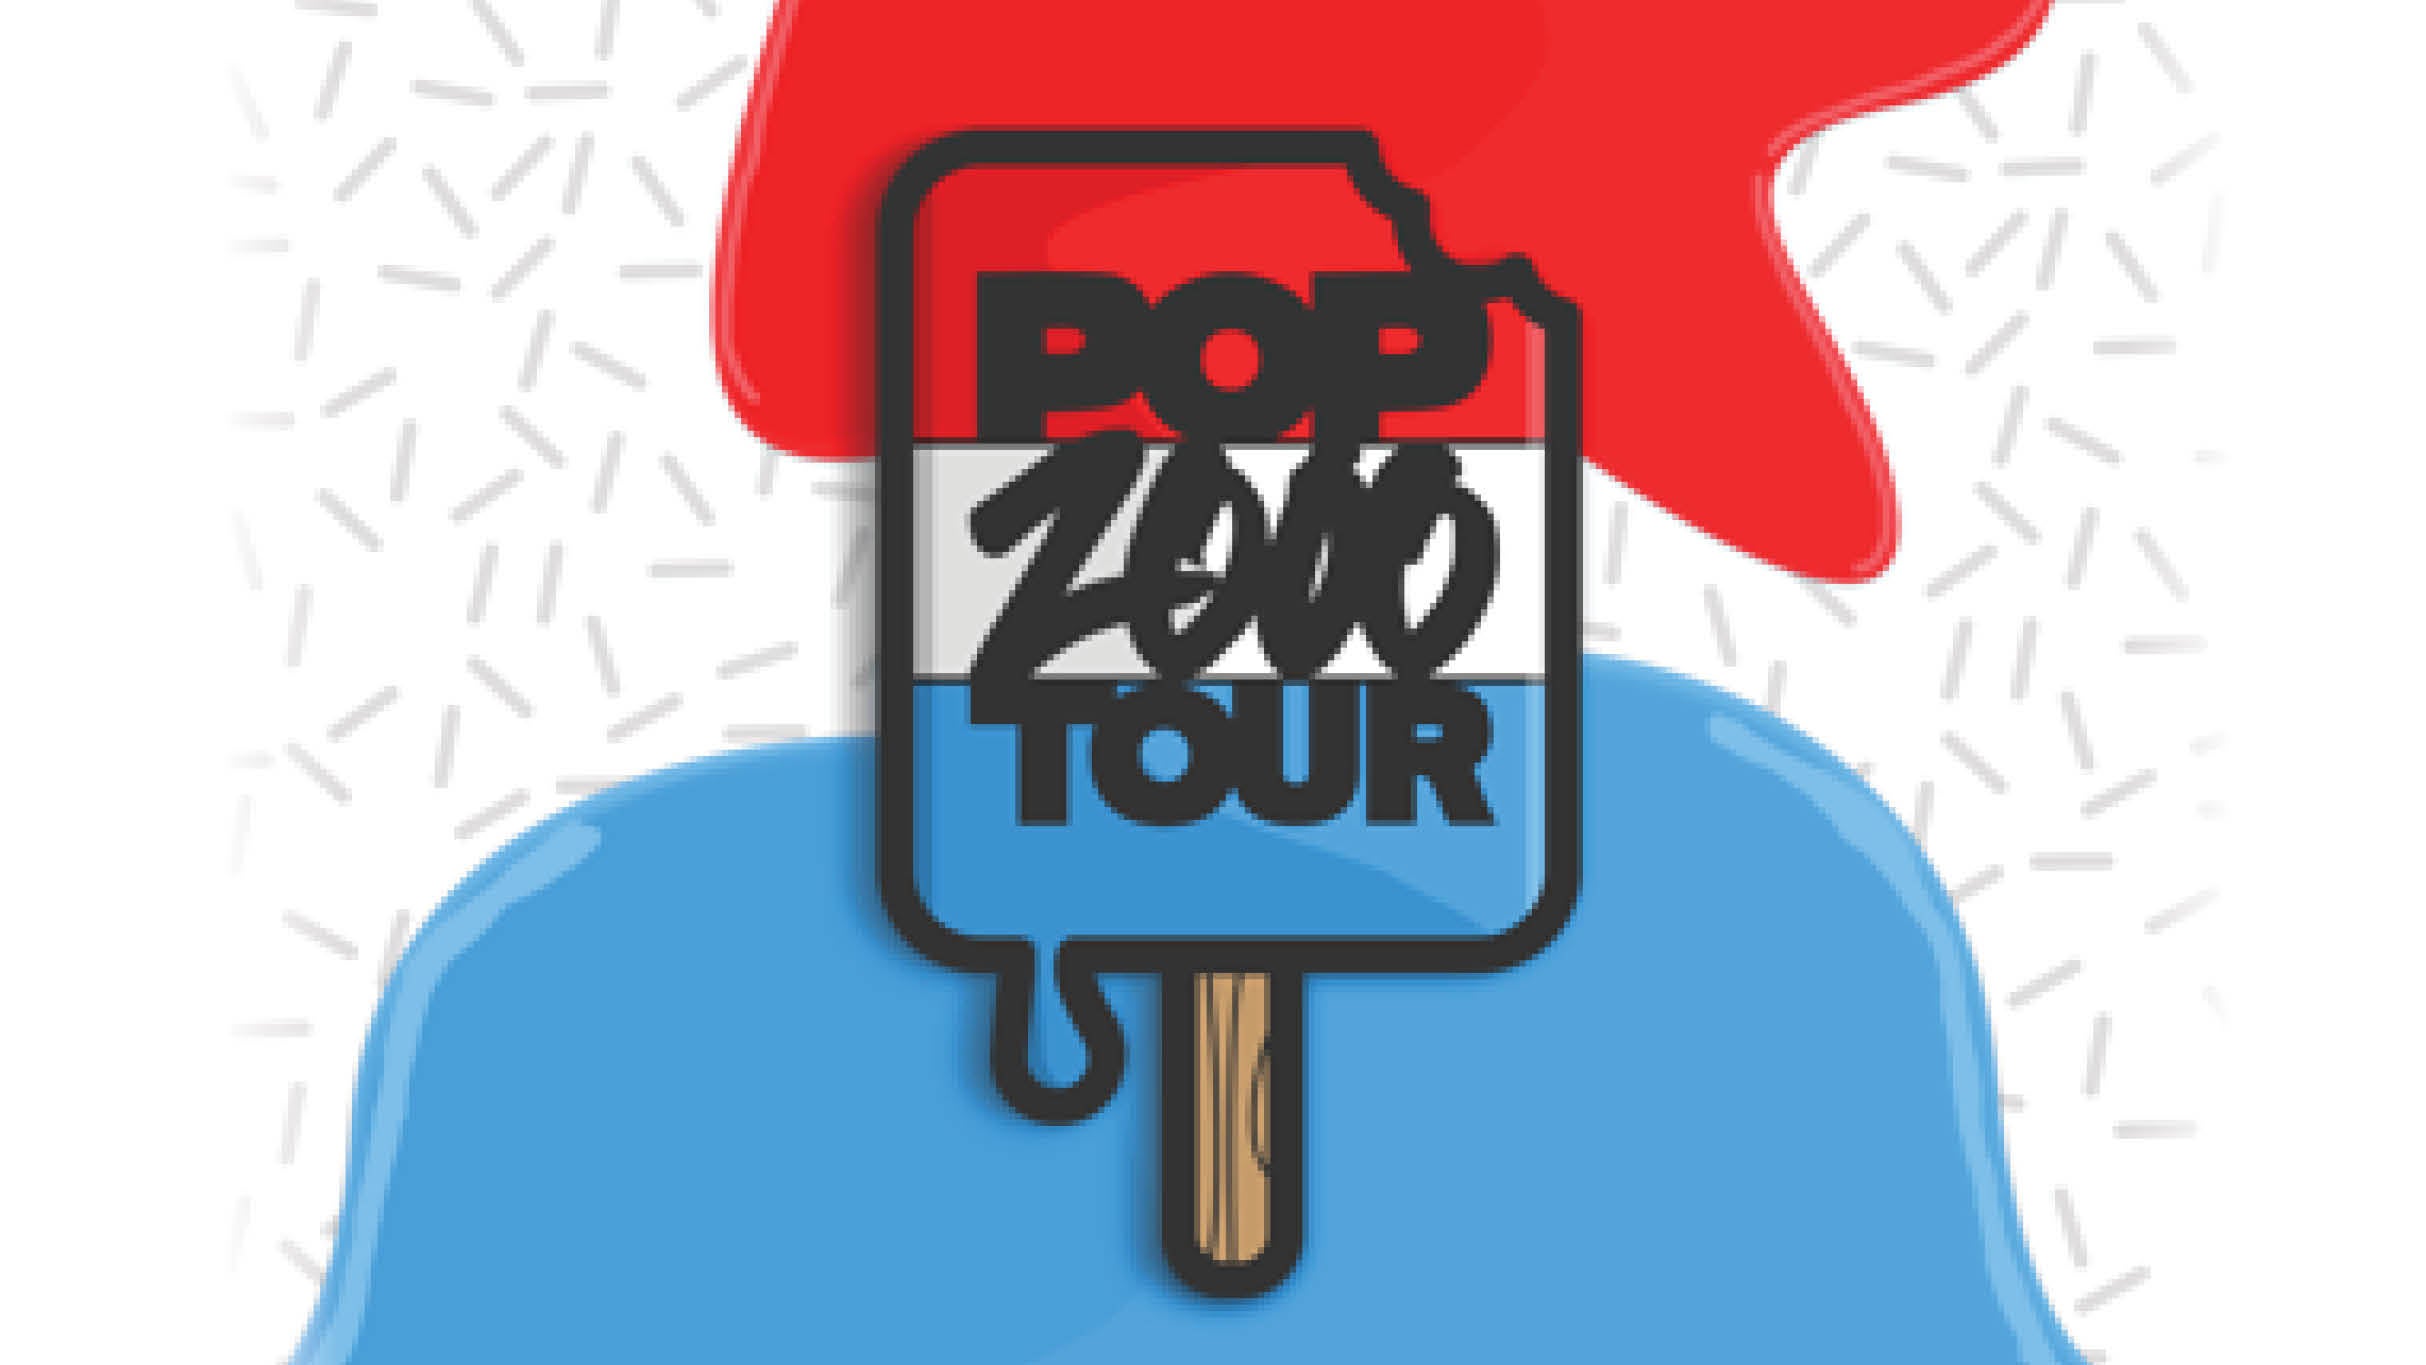 POP 2000 Tour presale code for show tickets in Cleveland, OH (House of Blues Cleveland)